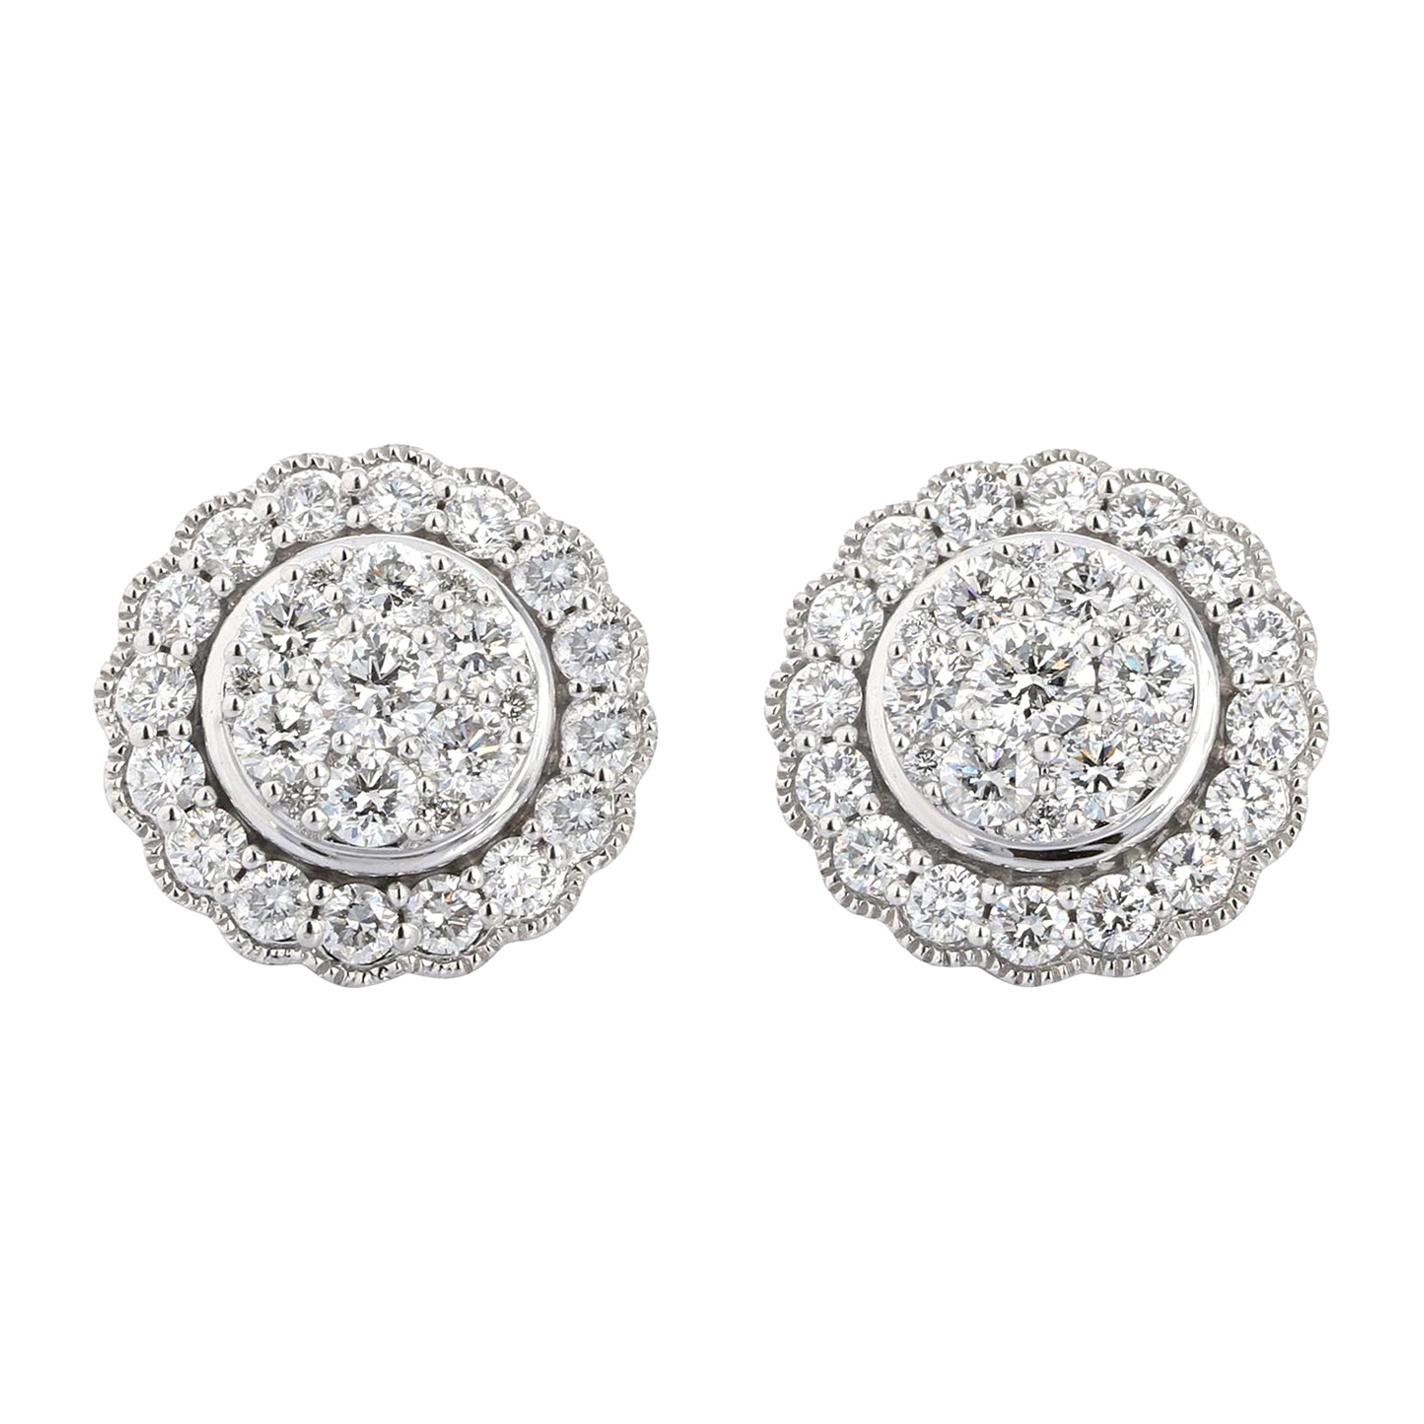 14 karat white gold diamond stud earrings with diamond halo. The total diamond carat weight is 1.50 and the stones are approximately H-I color (near colorless) and VS/SI (eye-clean) clarity. 
The earring are designed to give the illusion of 1 large